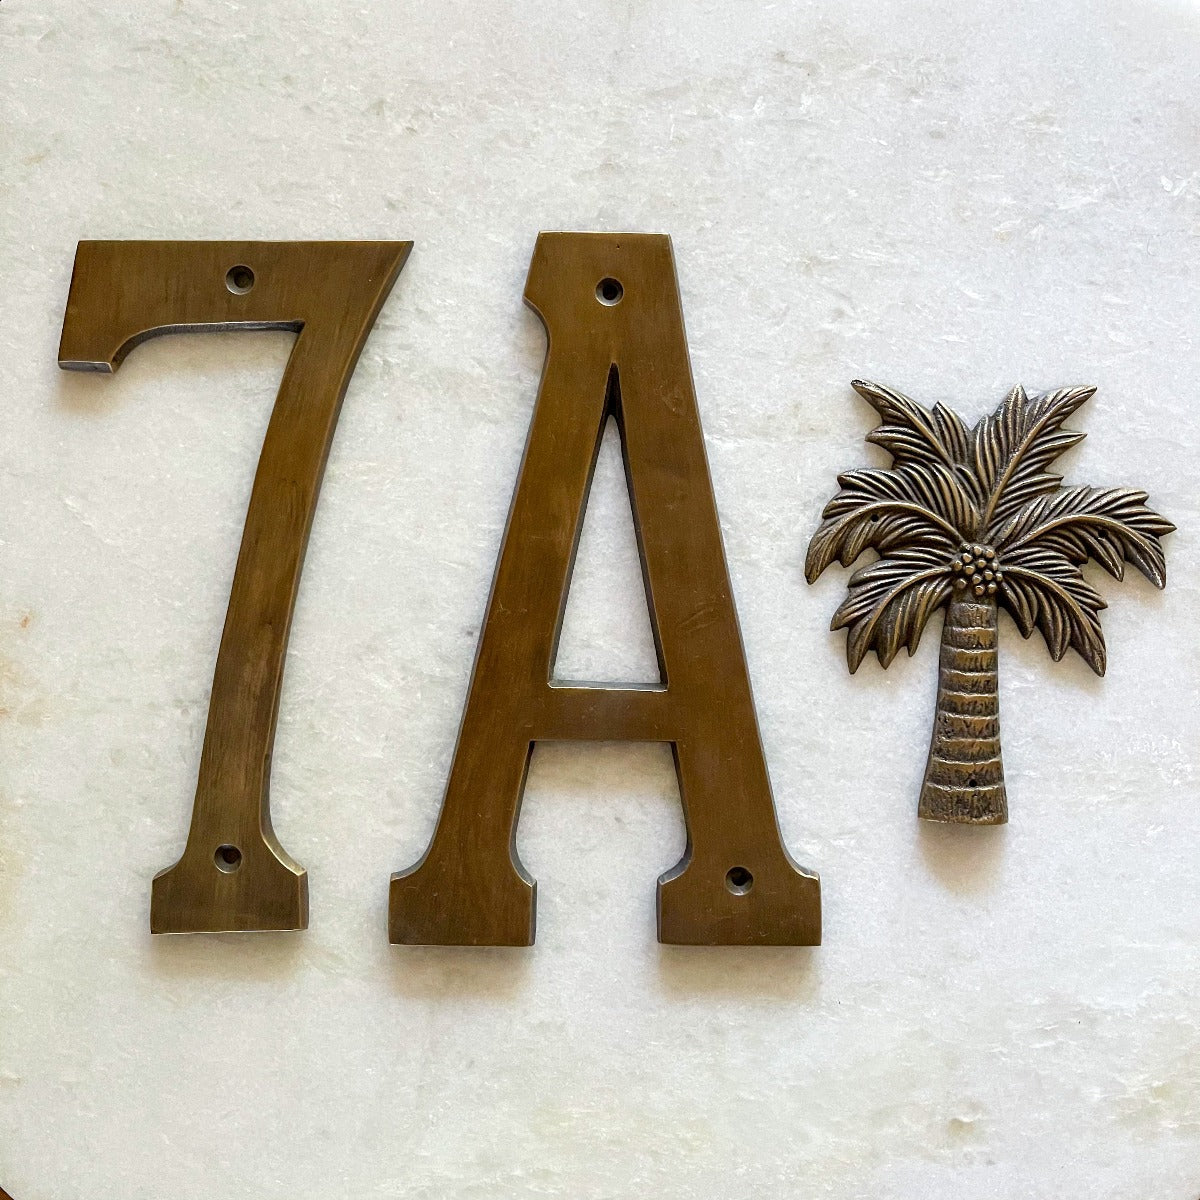 :Large Brass Number 7 and Letter A with palm tree plaque in antique finish by Ocean Luxe